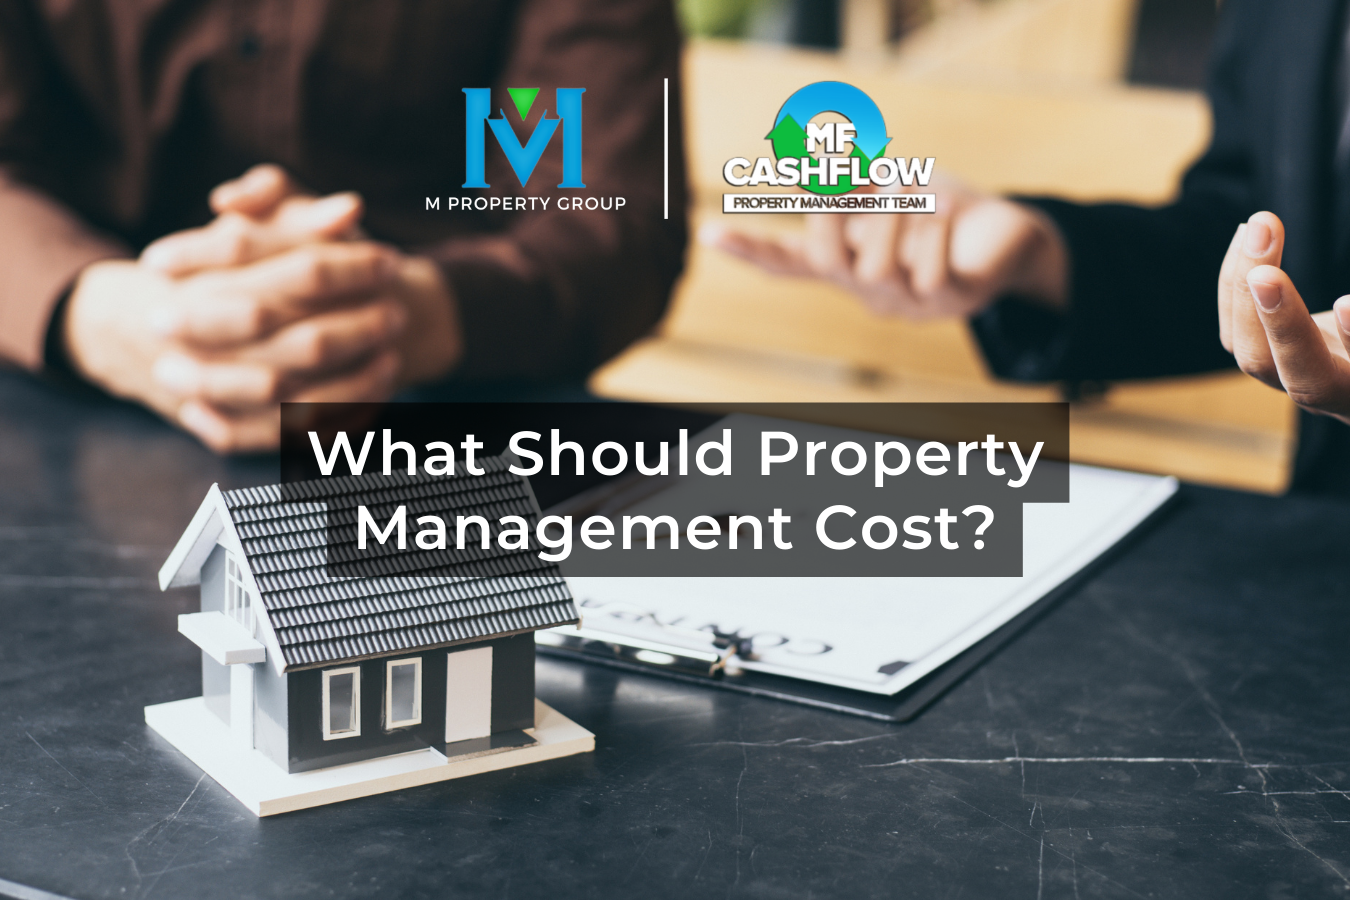 What Should Property Management Cost?